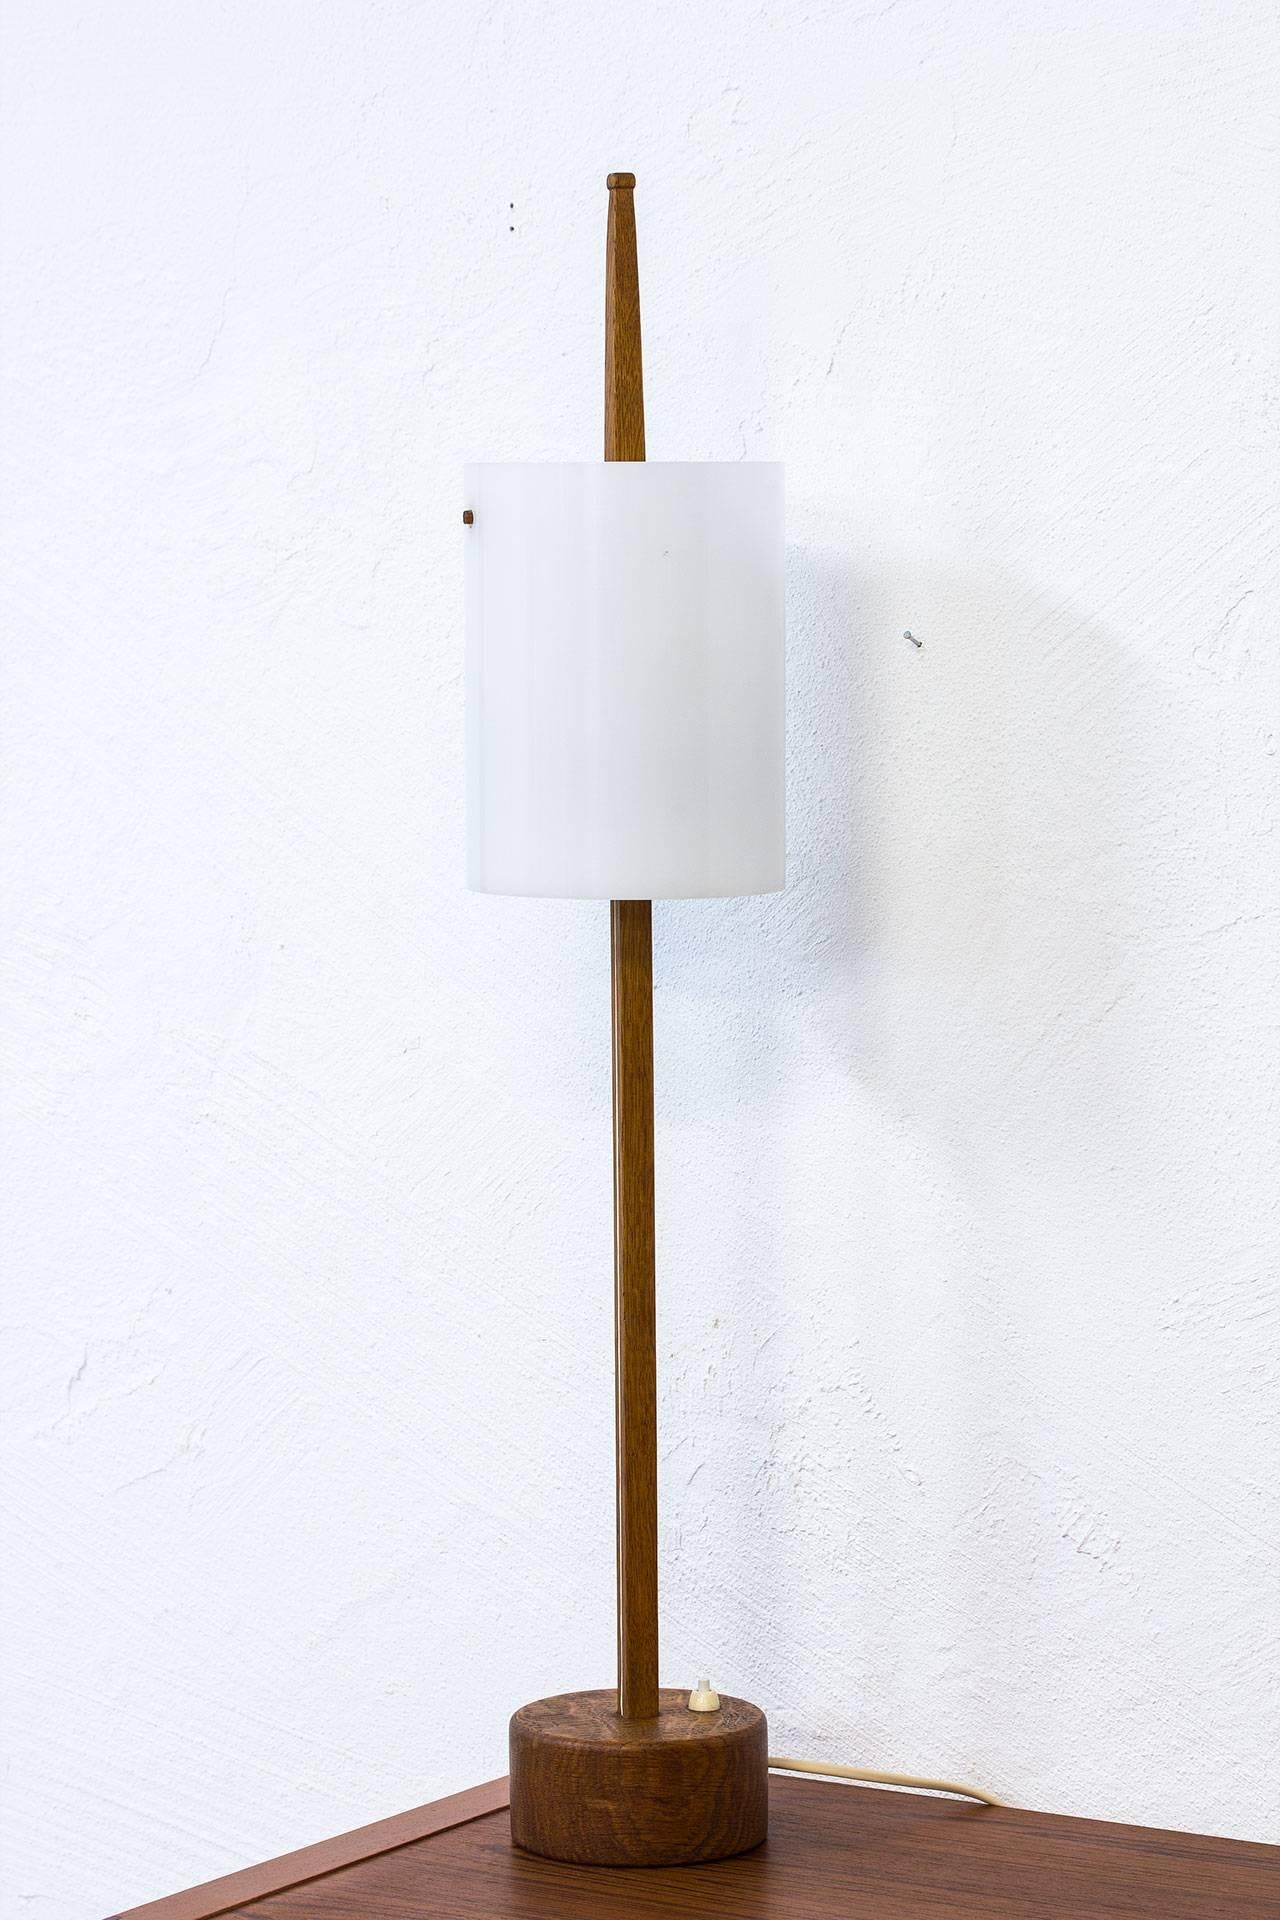 Rare and tall table lamp
designed by Uno & Östen
Kristiansson for their own
company Luxus at Vittsjö,
Sweden during the 1950s.
Solid oak base and stem
with acrylic shade. Signed
with label.